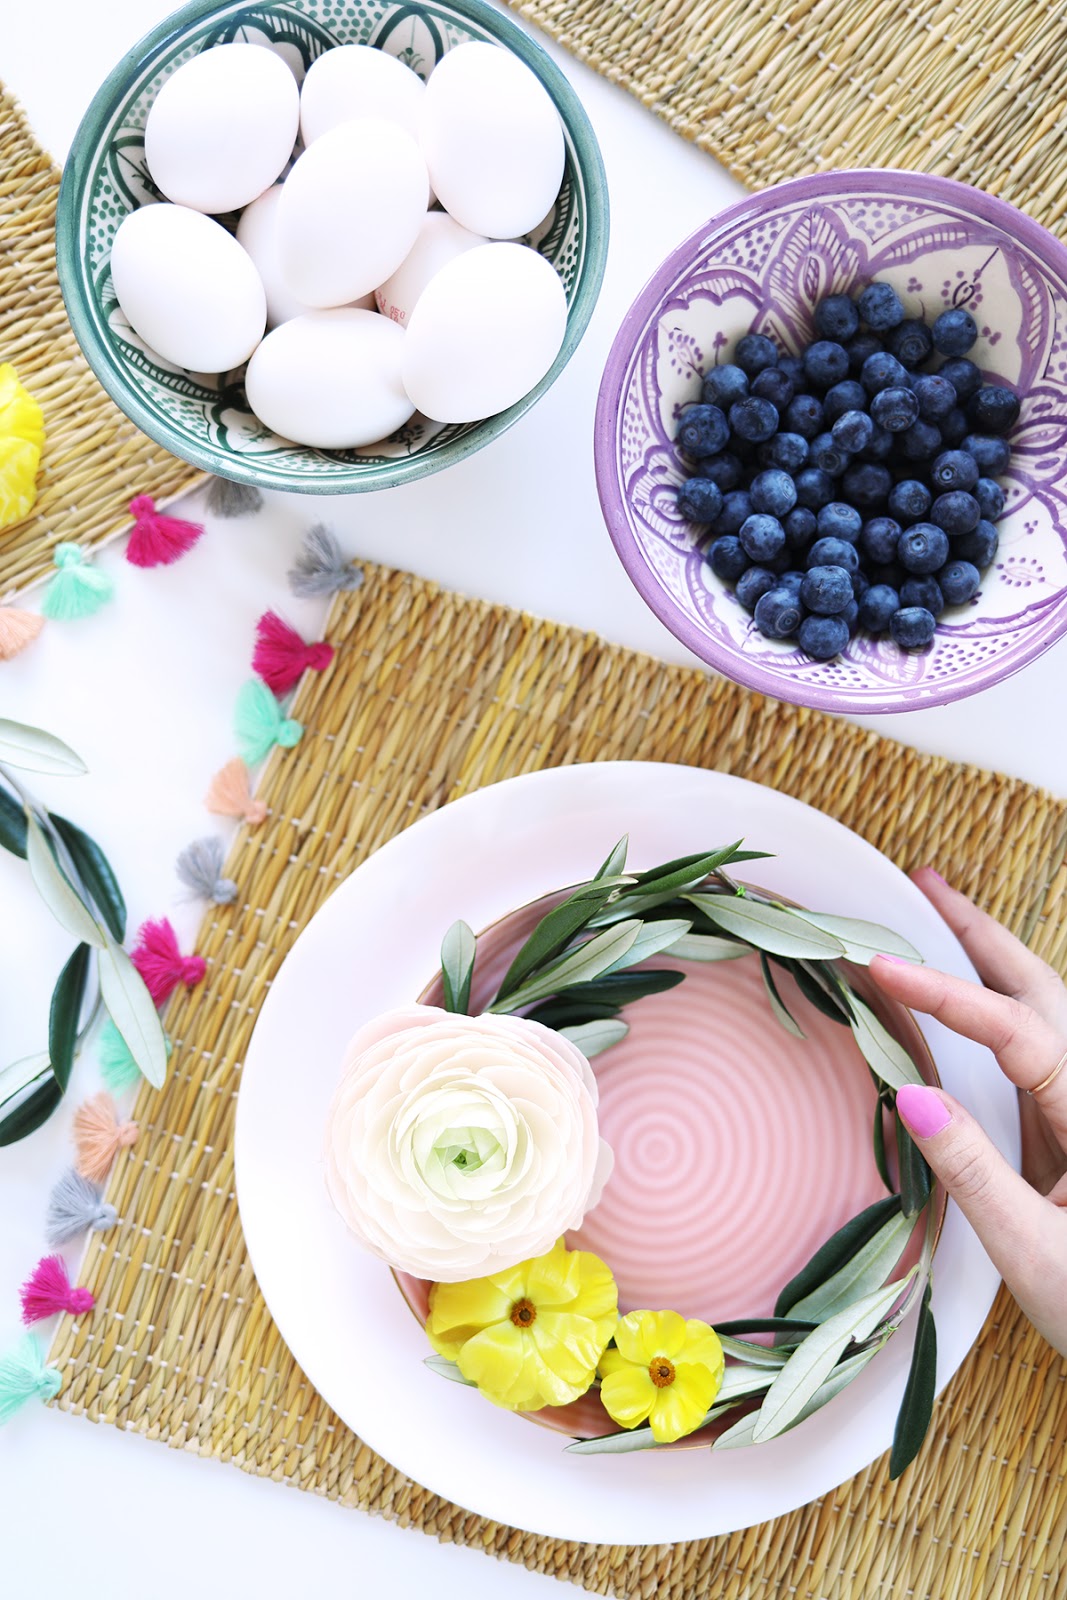 Easter Brunch With Girlfriends: DIY Tabletop Flower Wreaths Edition